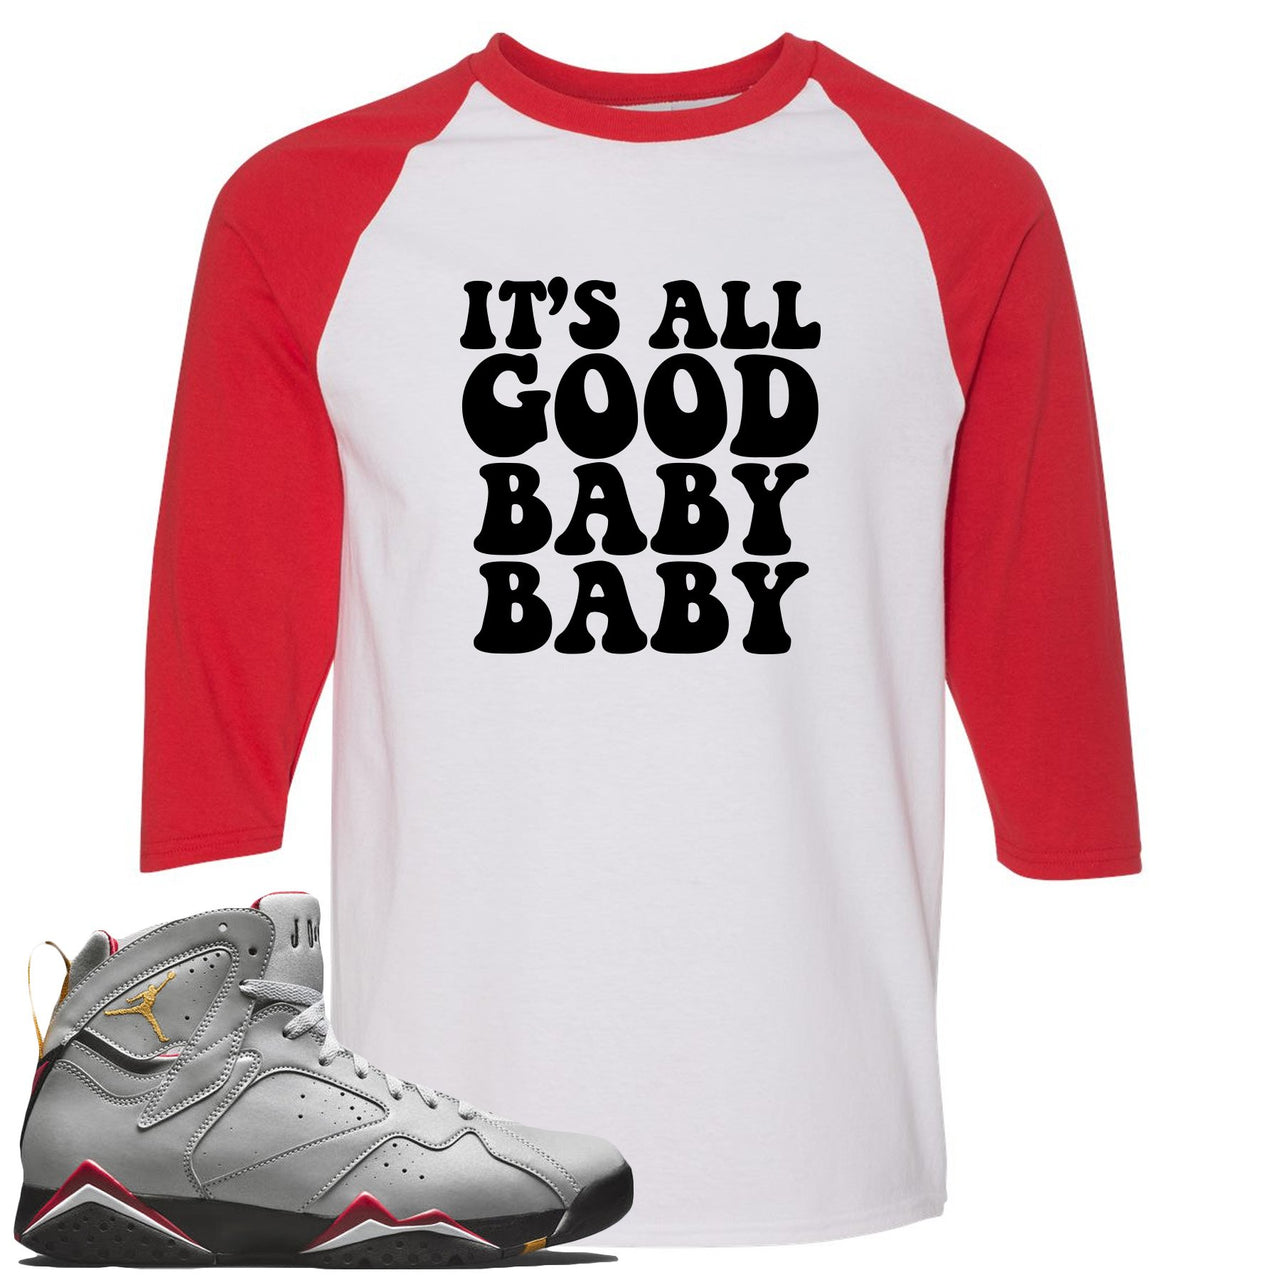 Reflections of a Champion 7s Raglan T Shirt | It's All Good Baby Baby, White and Red